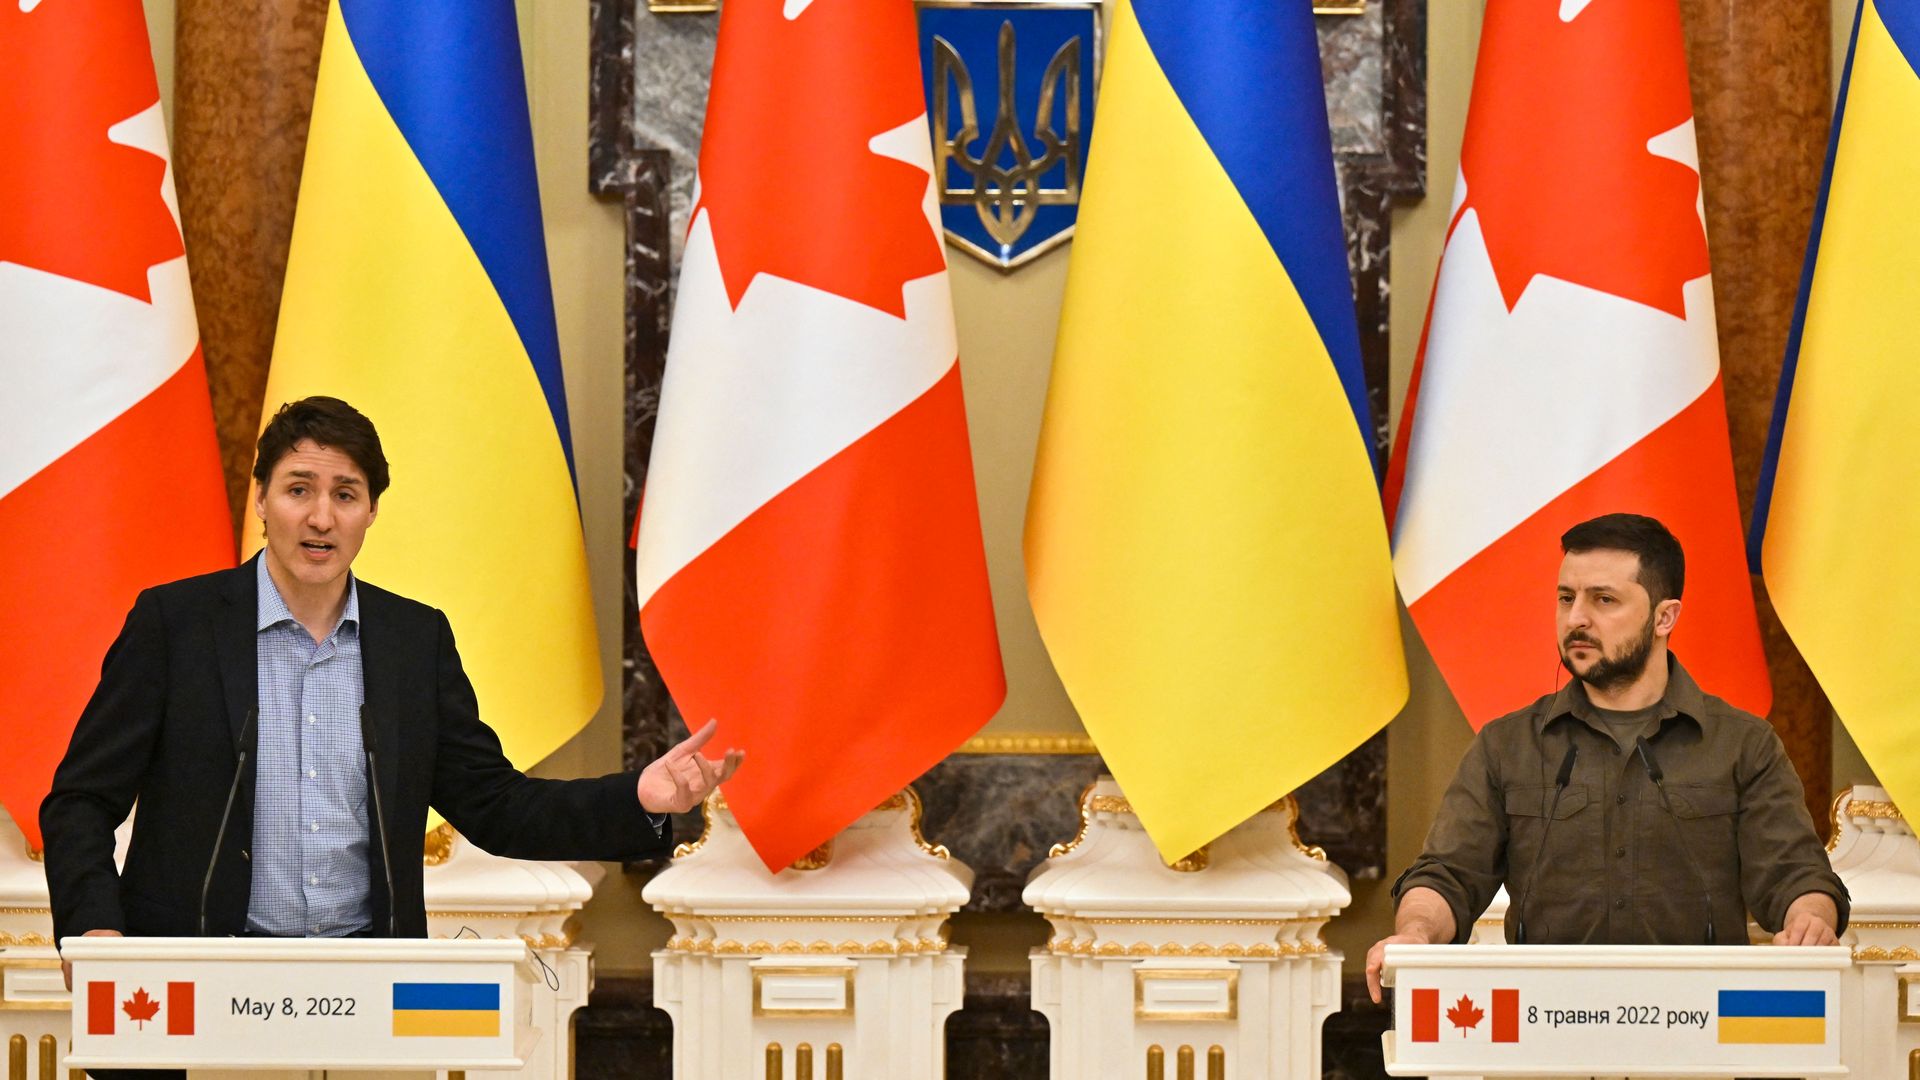 Trudeau and Zelensky joint press conference